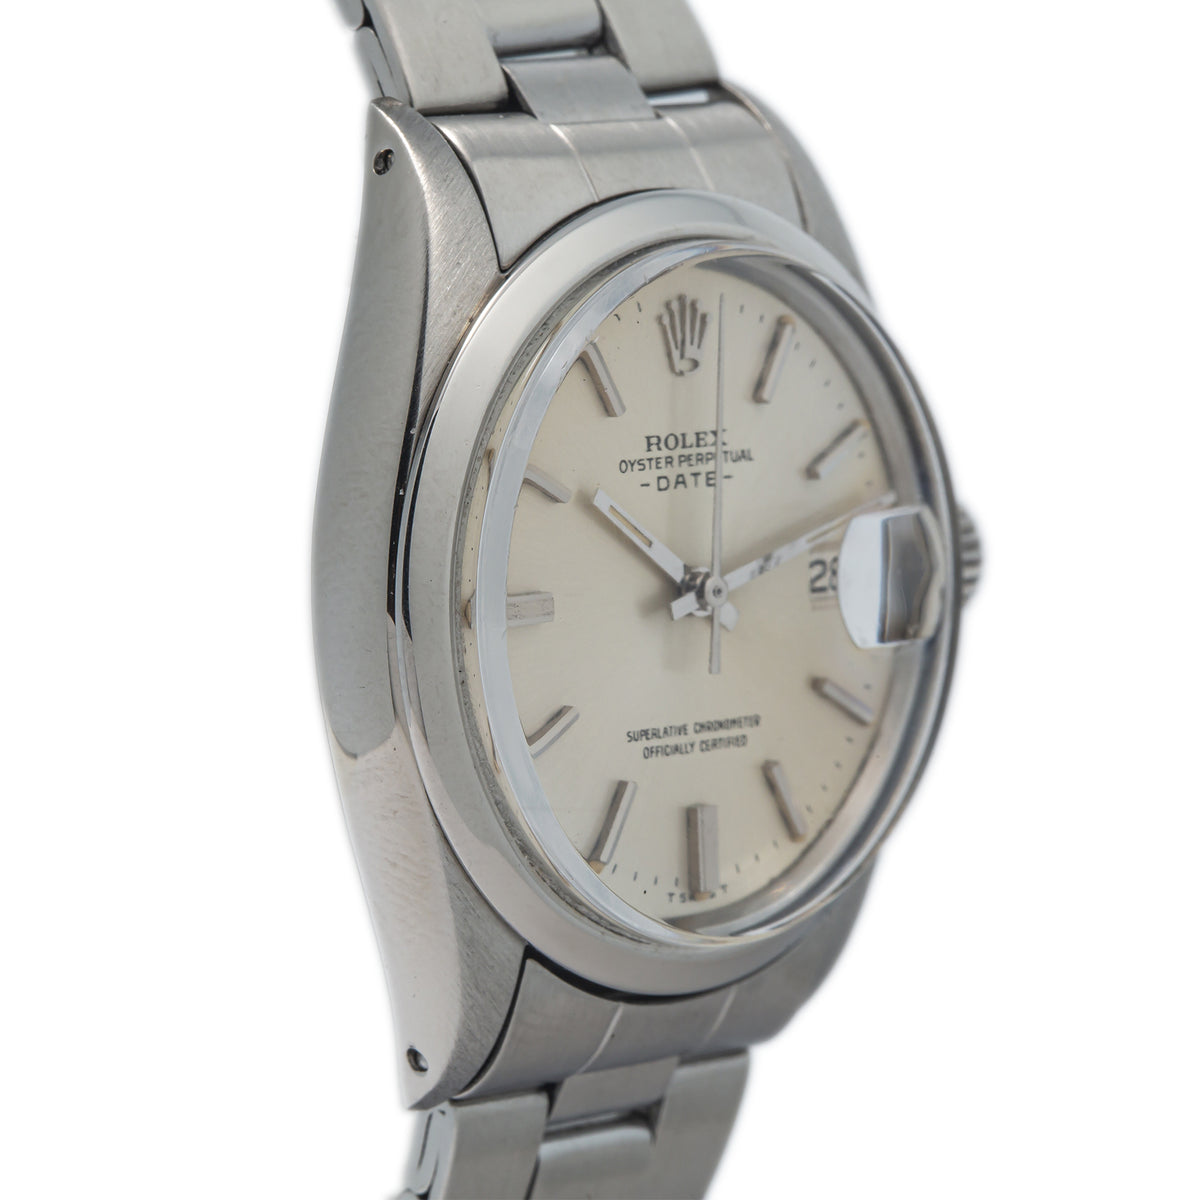 Rolex Oyster Perpetual Date 1500 StainlessSteel Silver Dial Automatic Watch 34mm